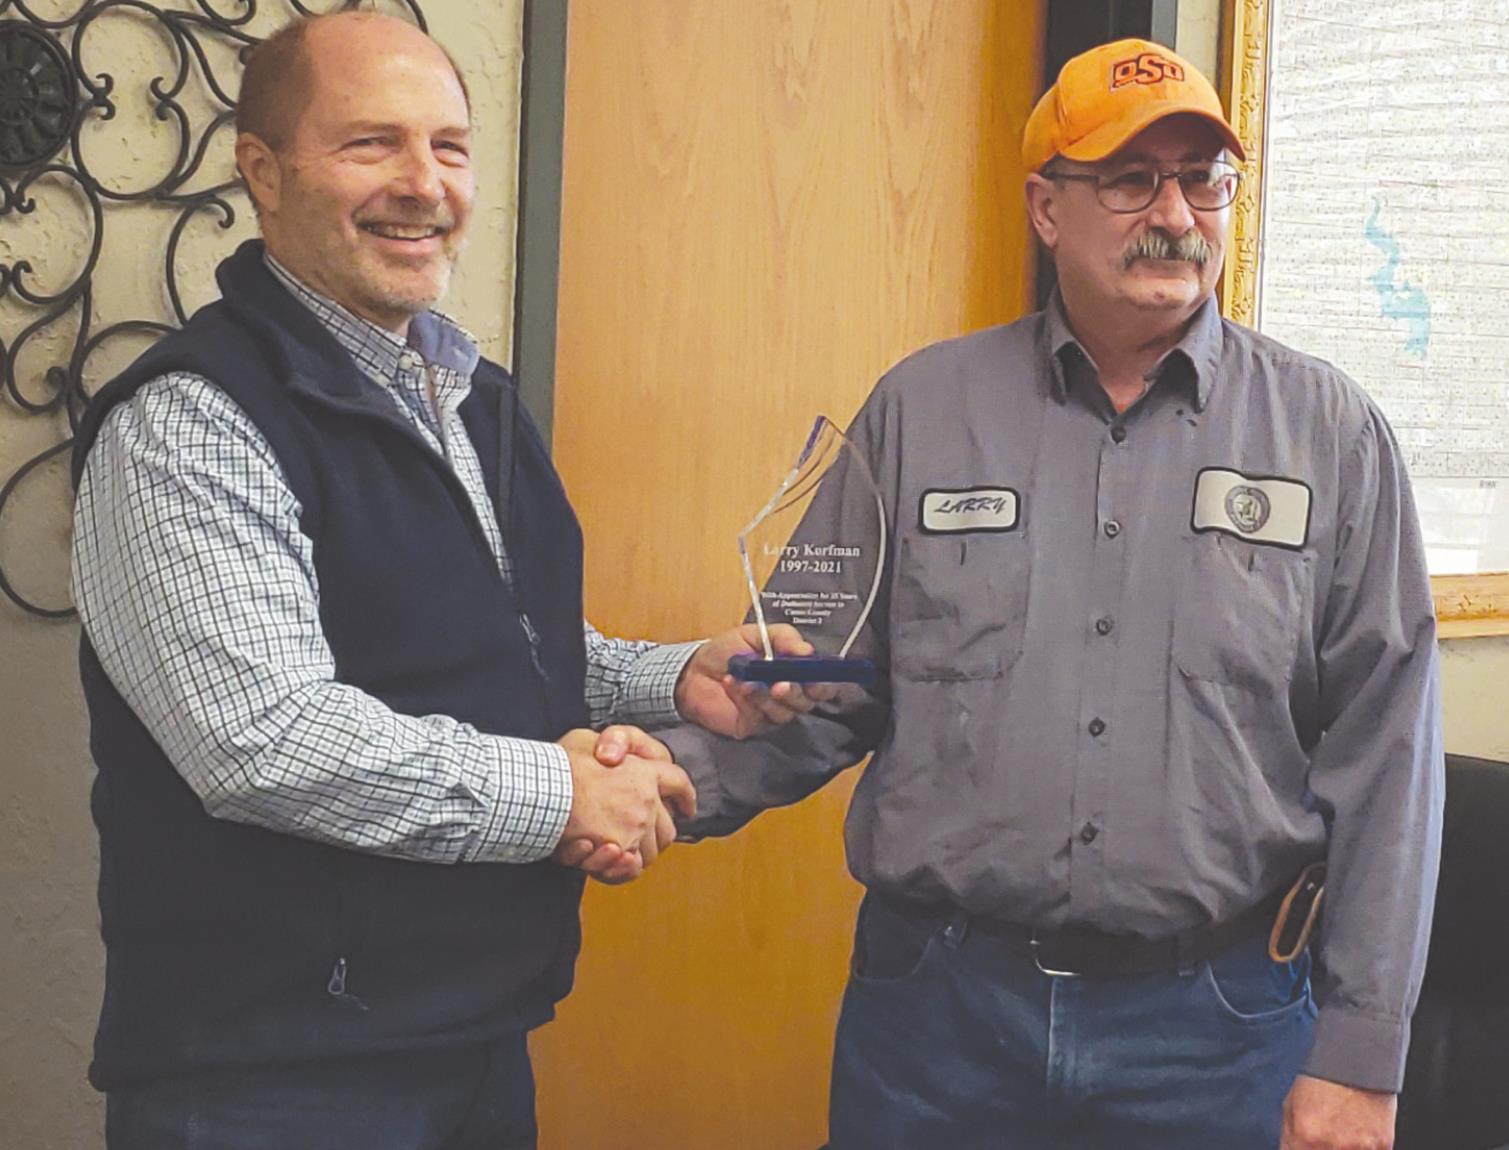 District 2 County Commissioner Bruce Walker honors Larry Korfman for 24 years of service during Monday’s commissioner meeting. Korfman is retiring. Leanna Cook/WDN